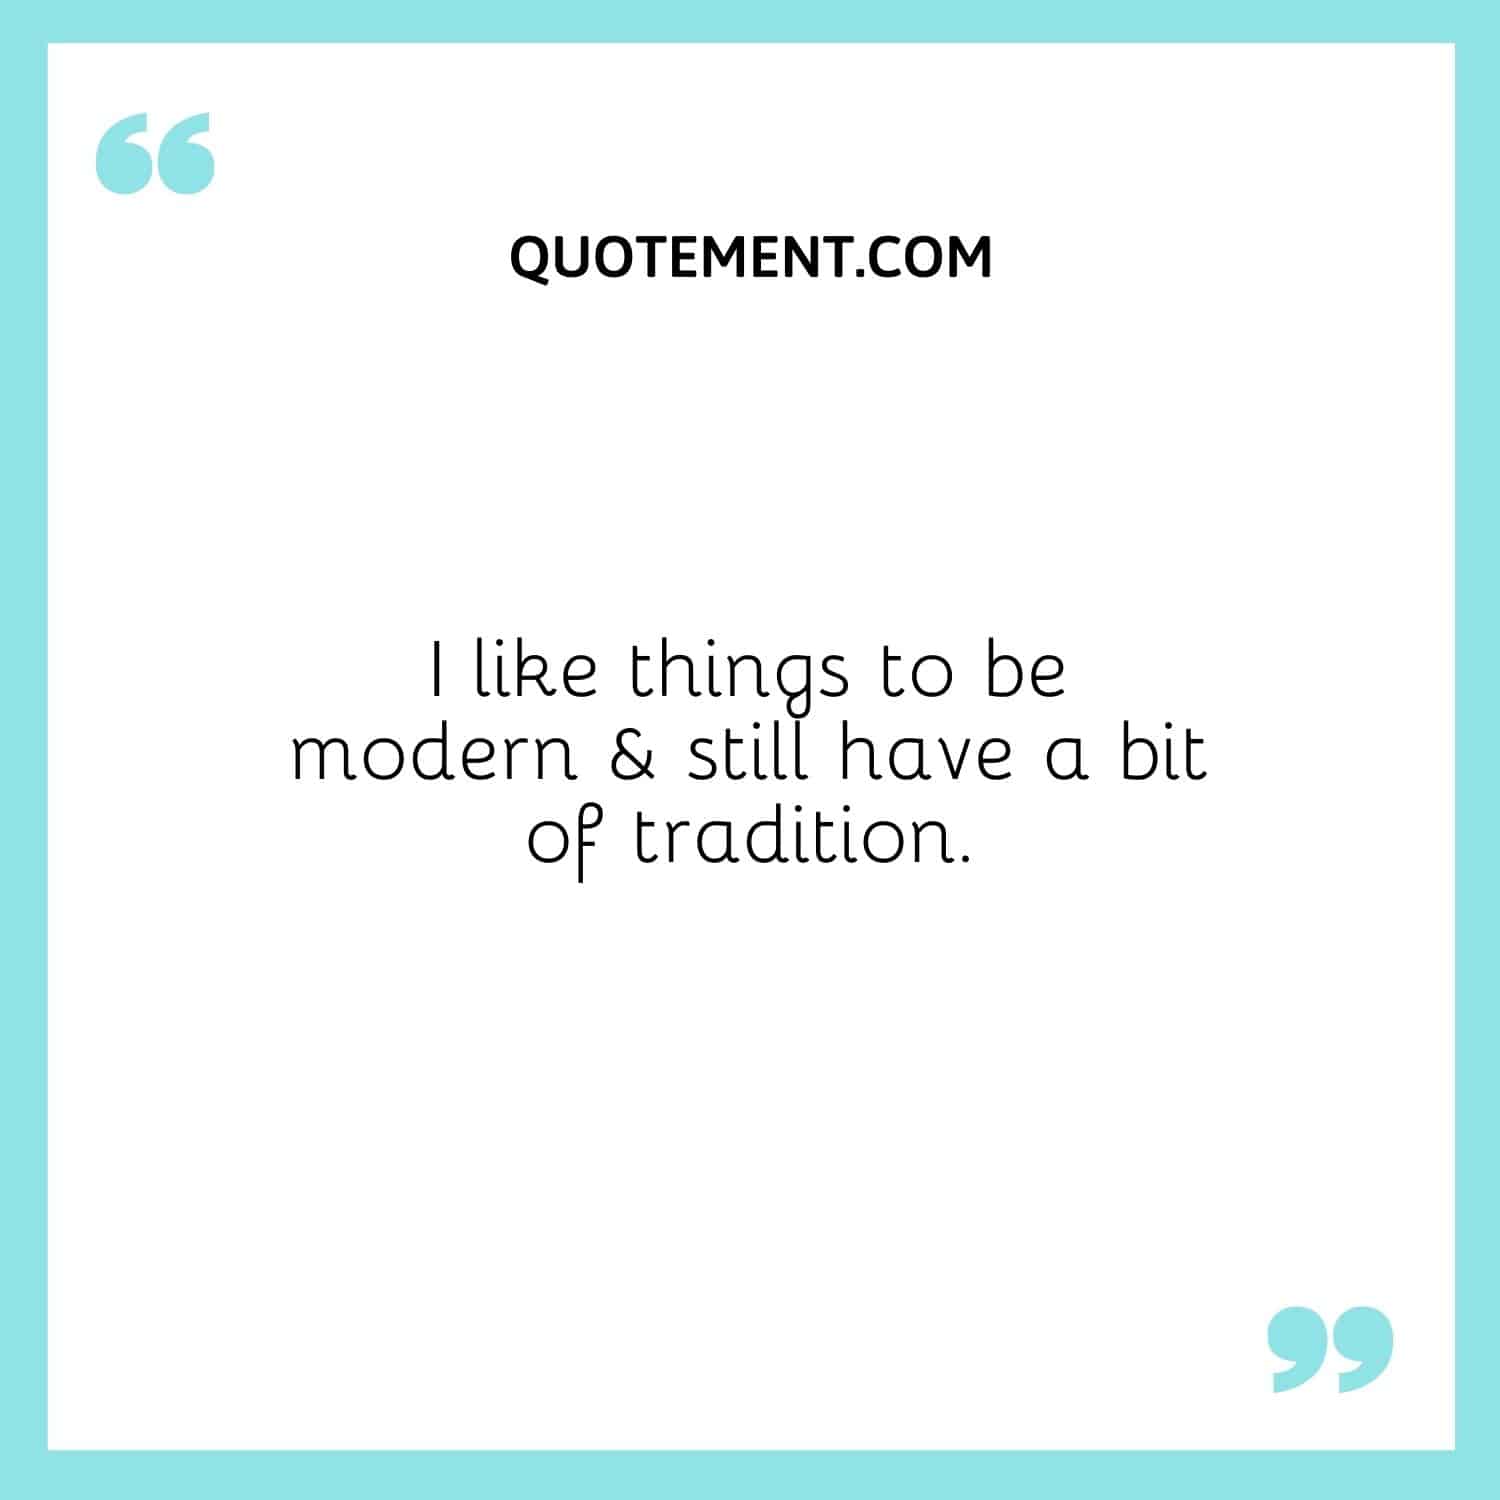 I like things to be modern & still have a bit of tradition.